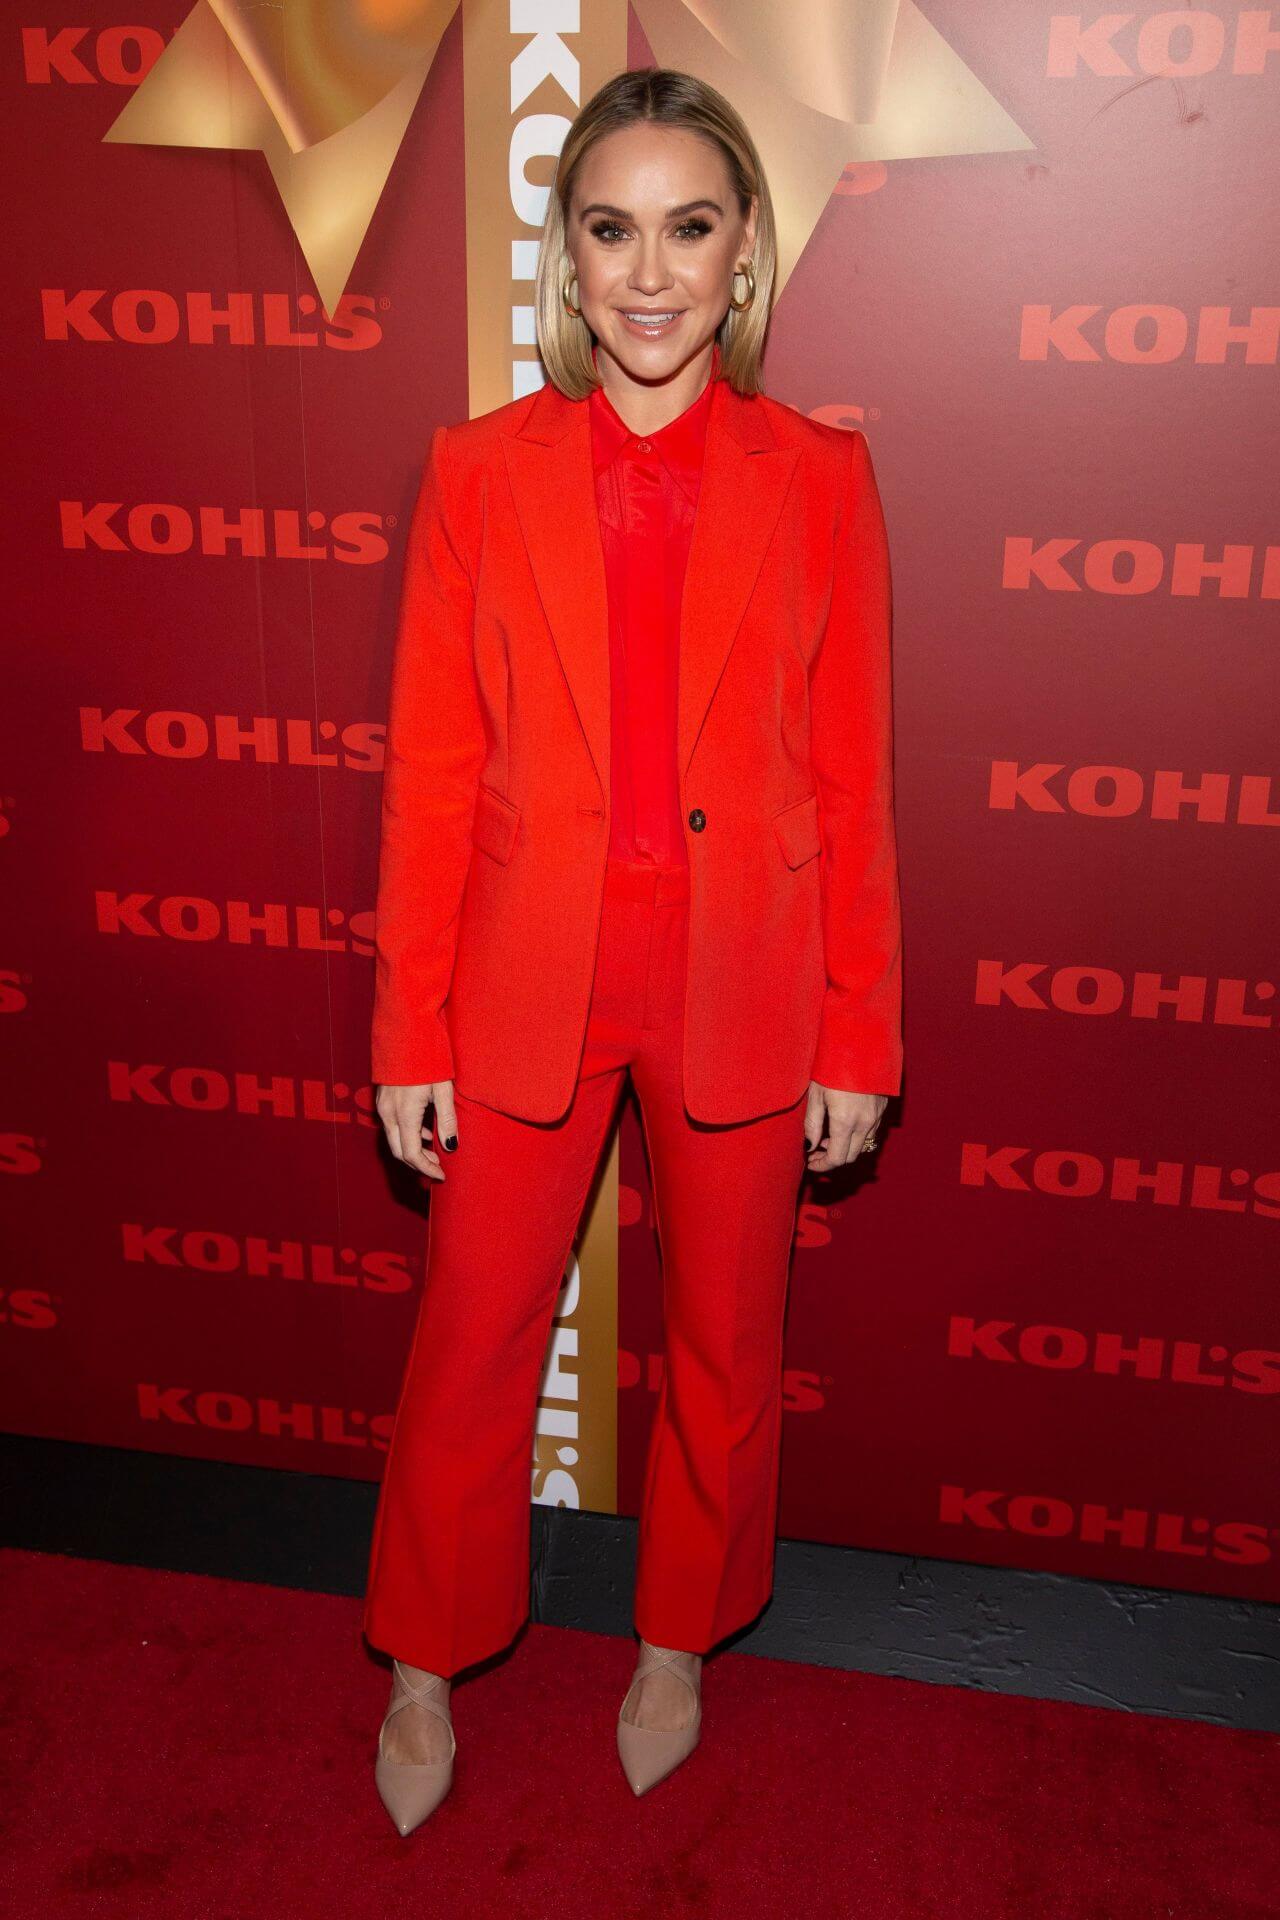 Becca Tobin  In Bright Red Three Piece Blazer Outfit At Kohl’s “New Gifts at Every Turn” Holiday Shopping Event in NYC